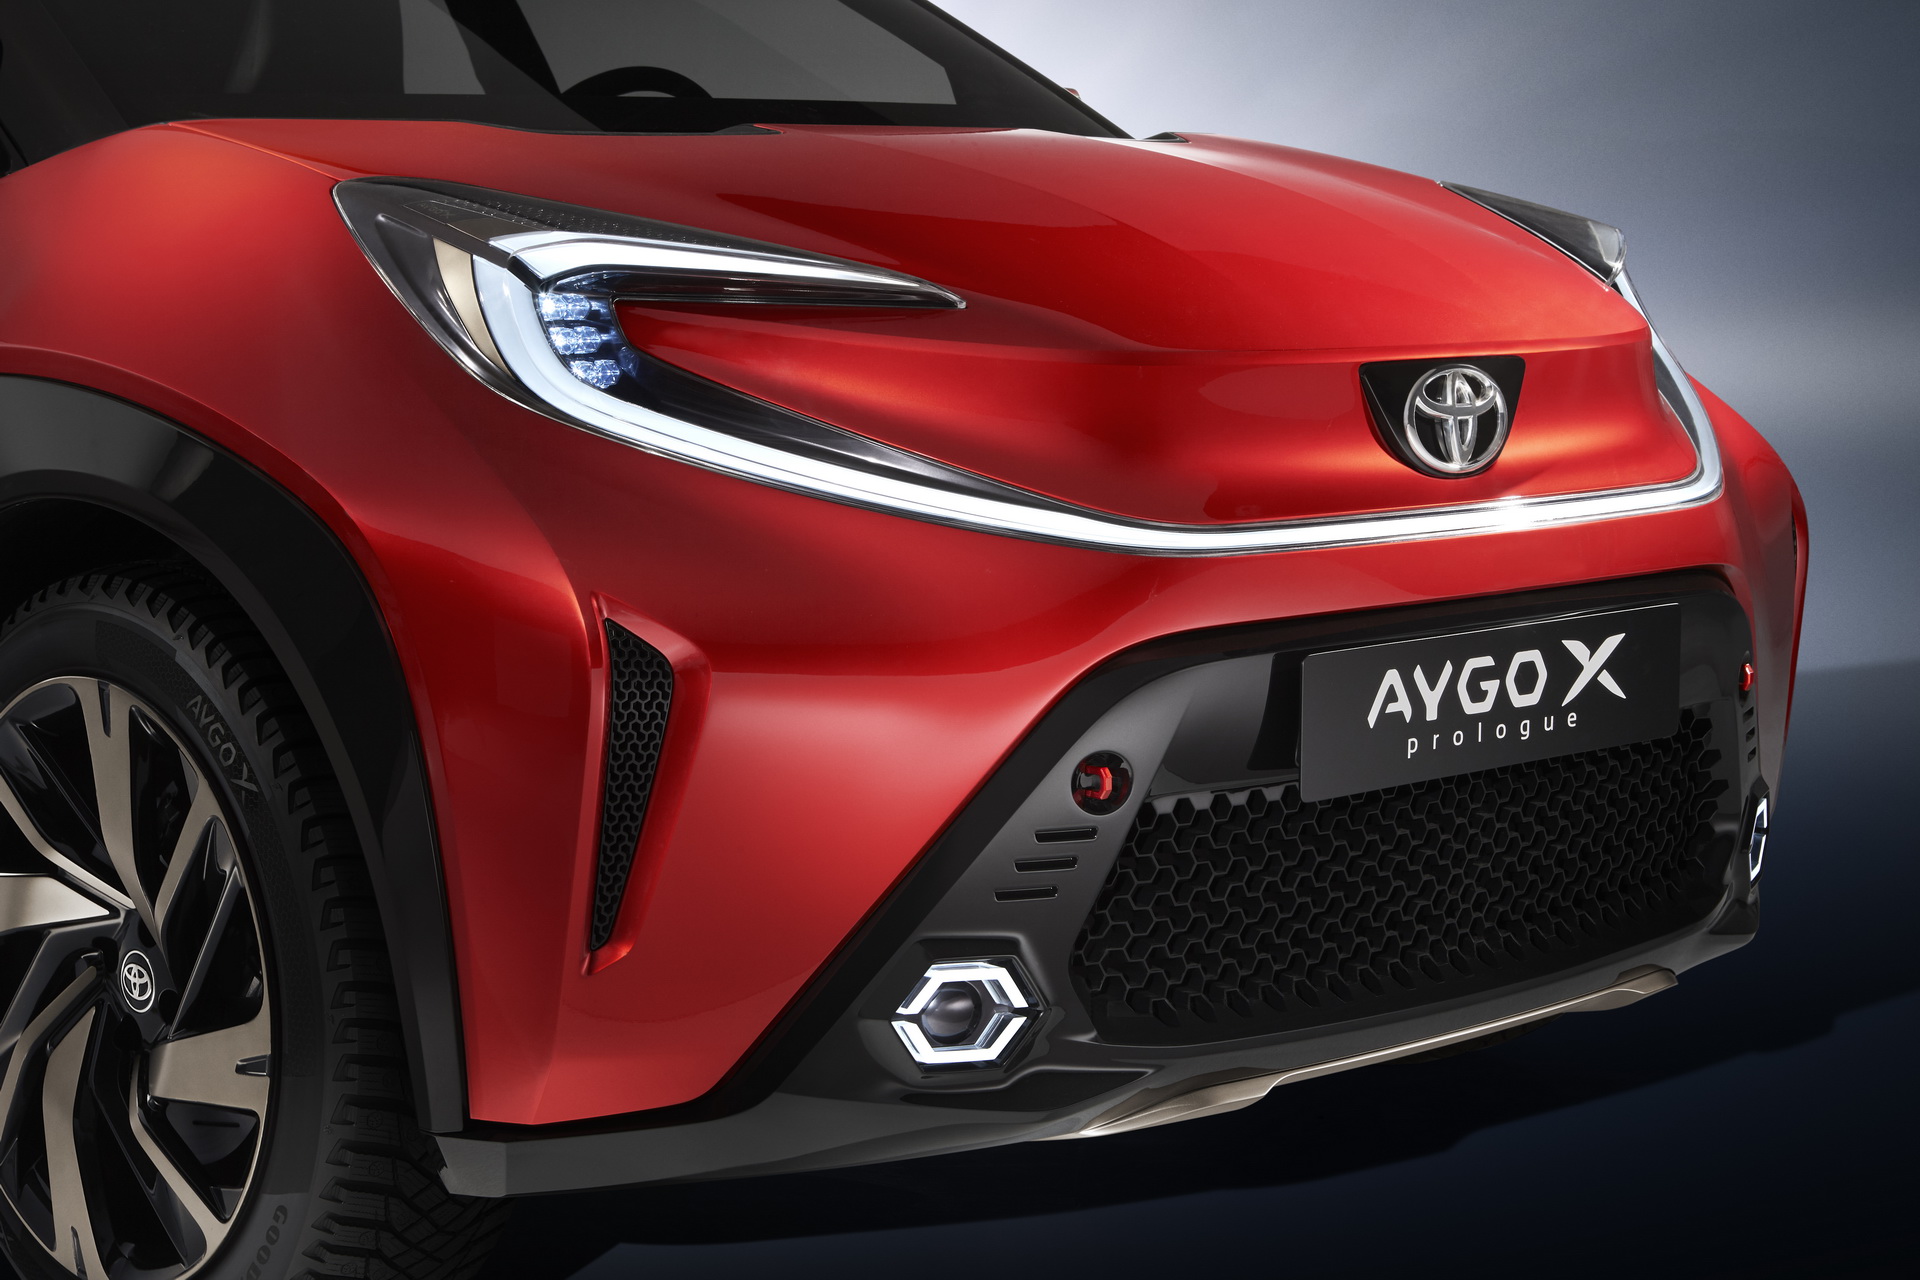 New Toyota Aygo X Prologue Concept Previews Small Rugged Crossover For 2022  | Carscoops